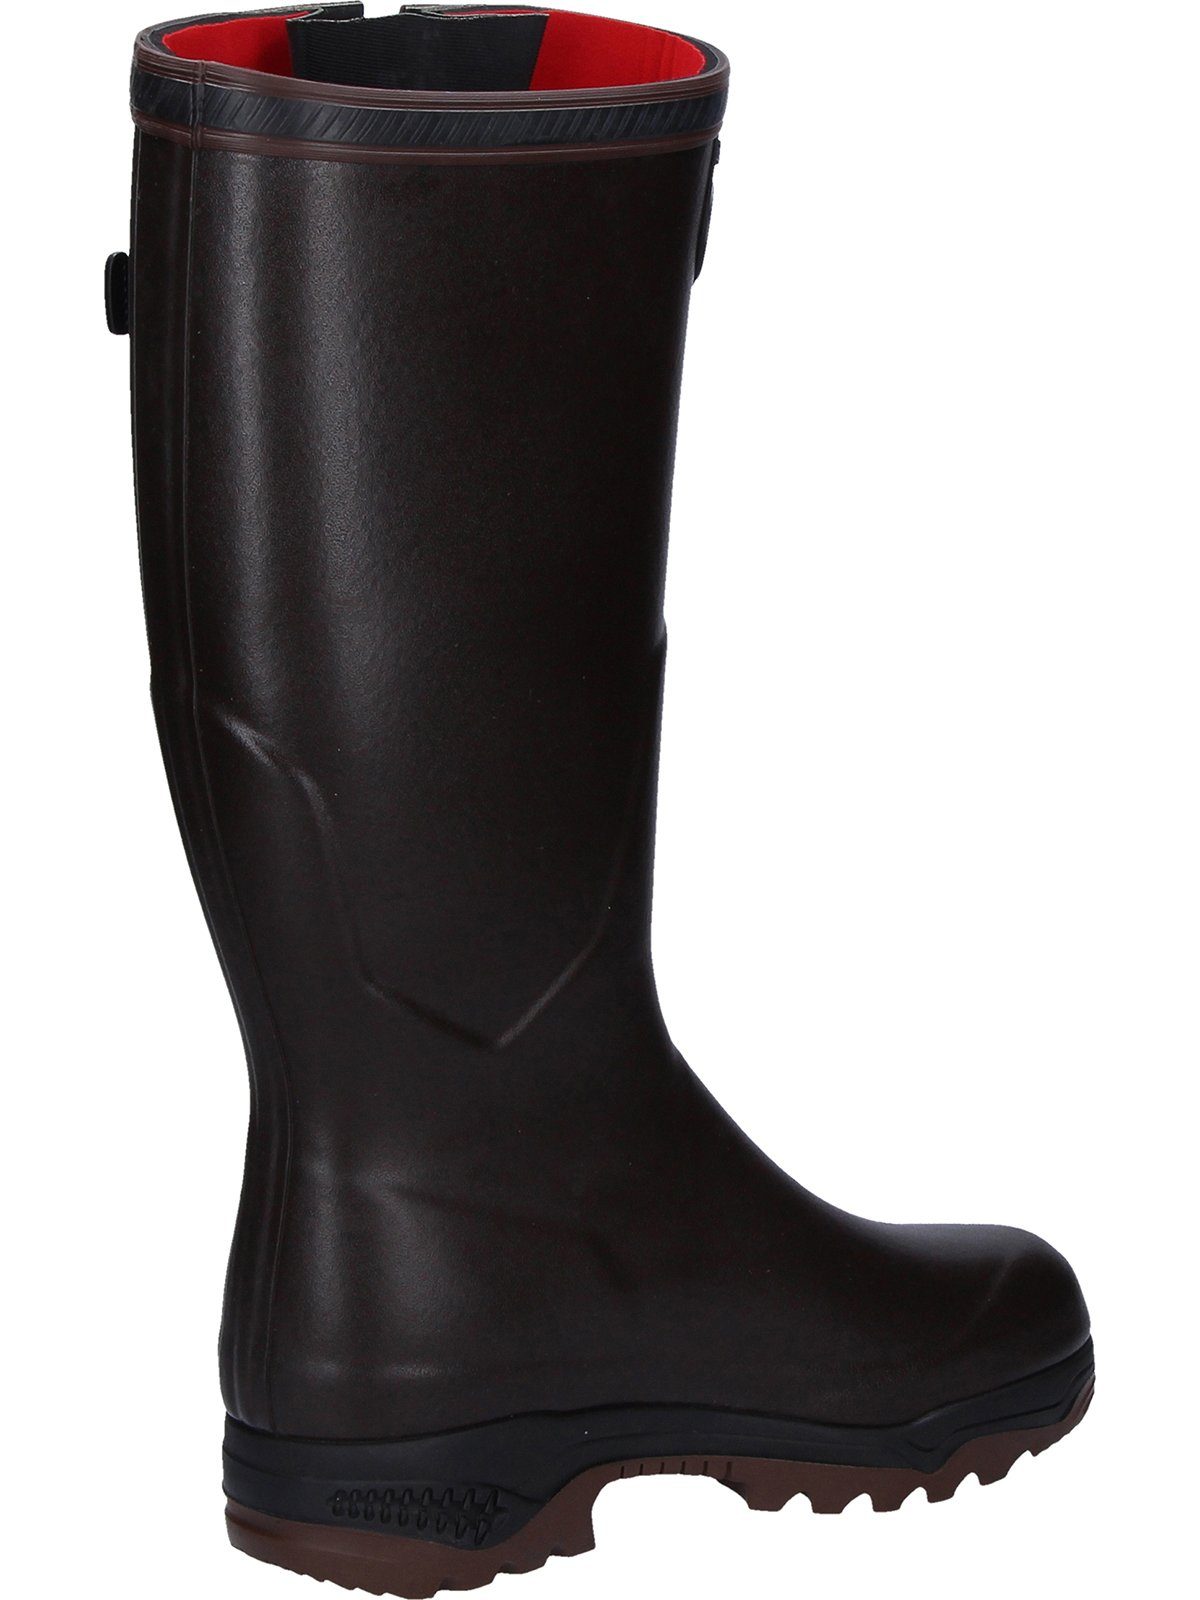 Stiefel Brun 2 Iso Aigle (Braun) Parcours®